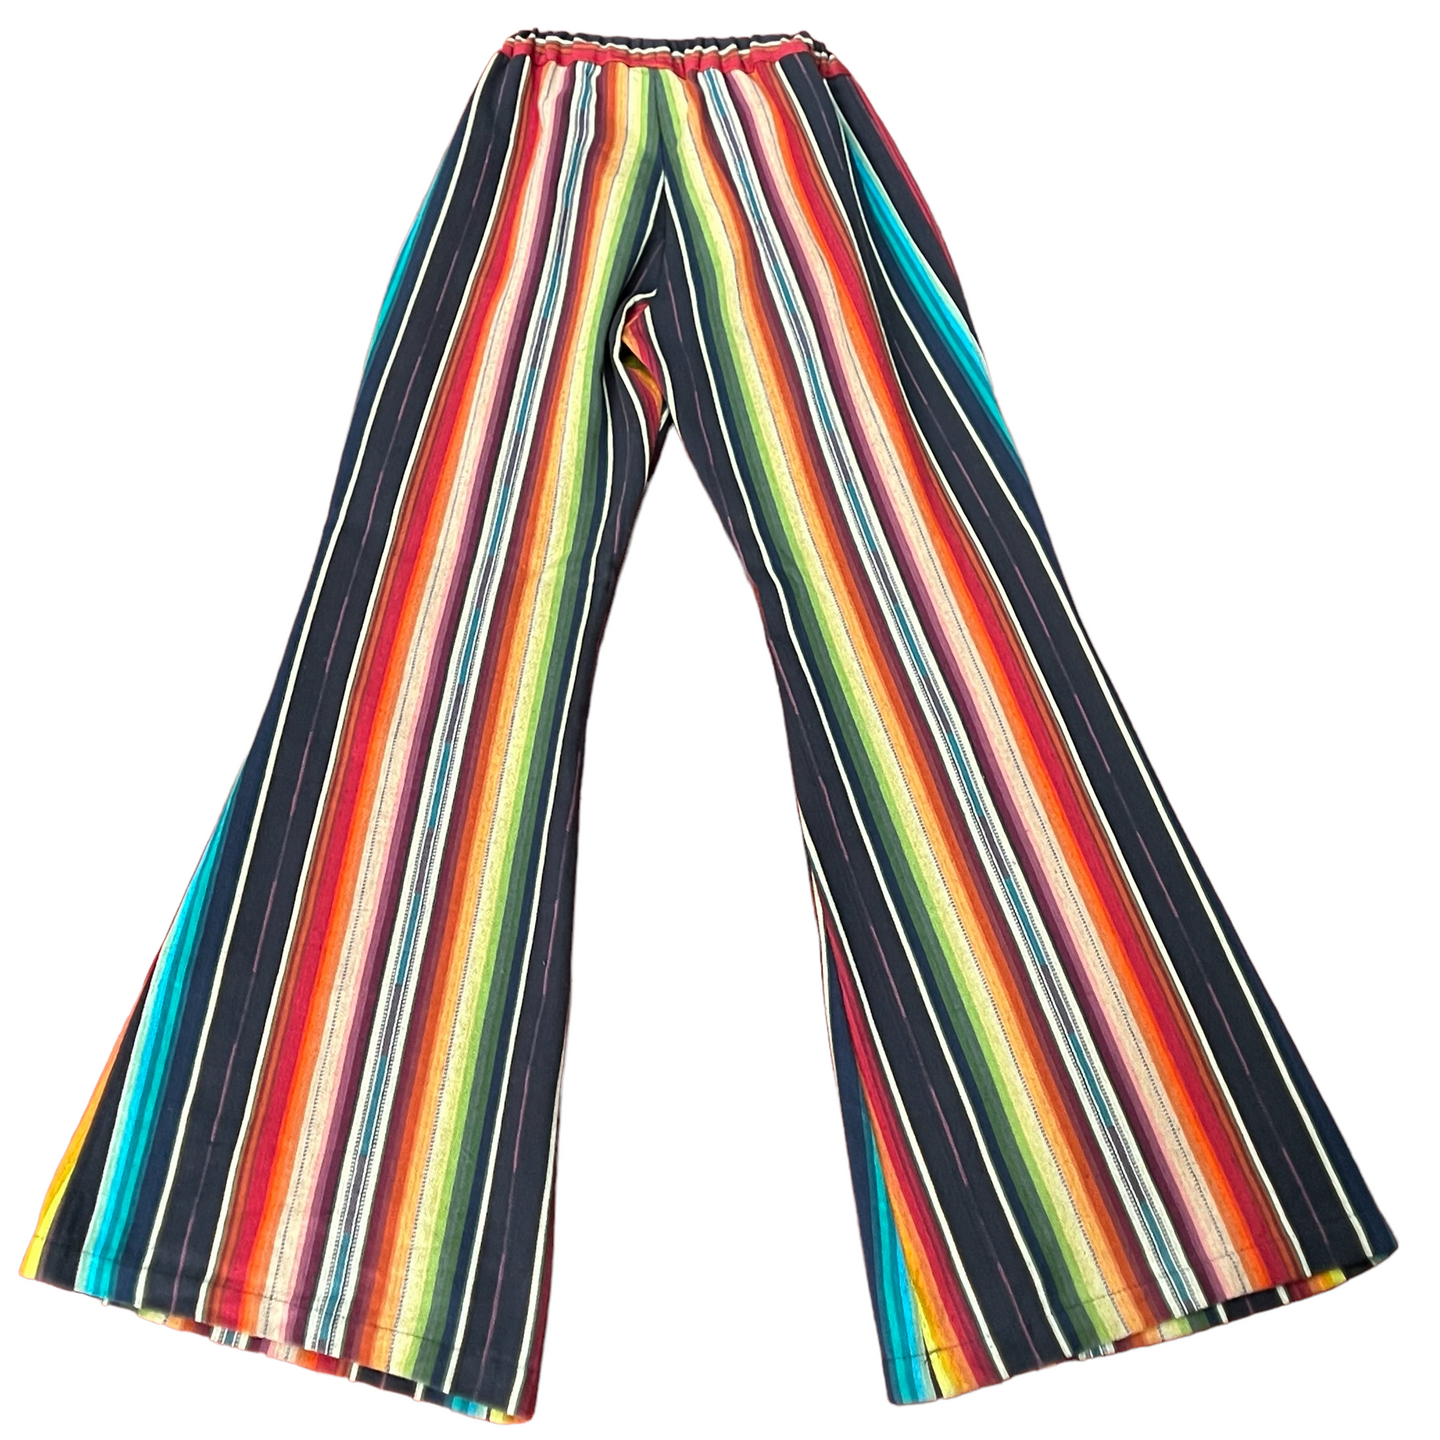 Silverado Striped Bell Bottom Pants Size Small/Medium. 100% Cotton. Elastic waistband. Made in the USA.